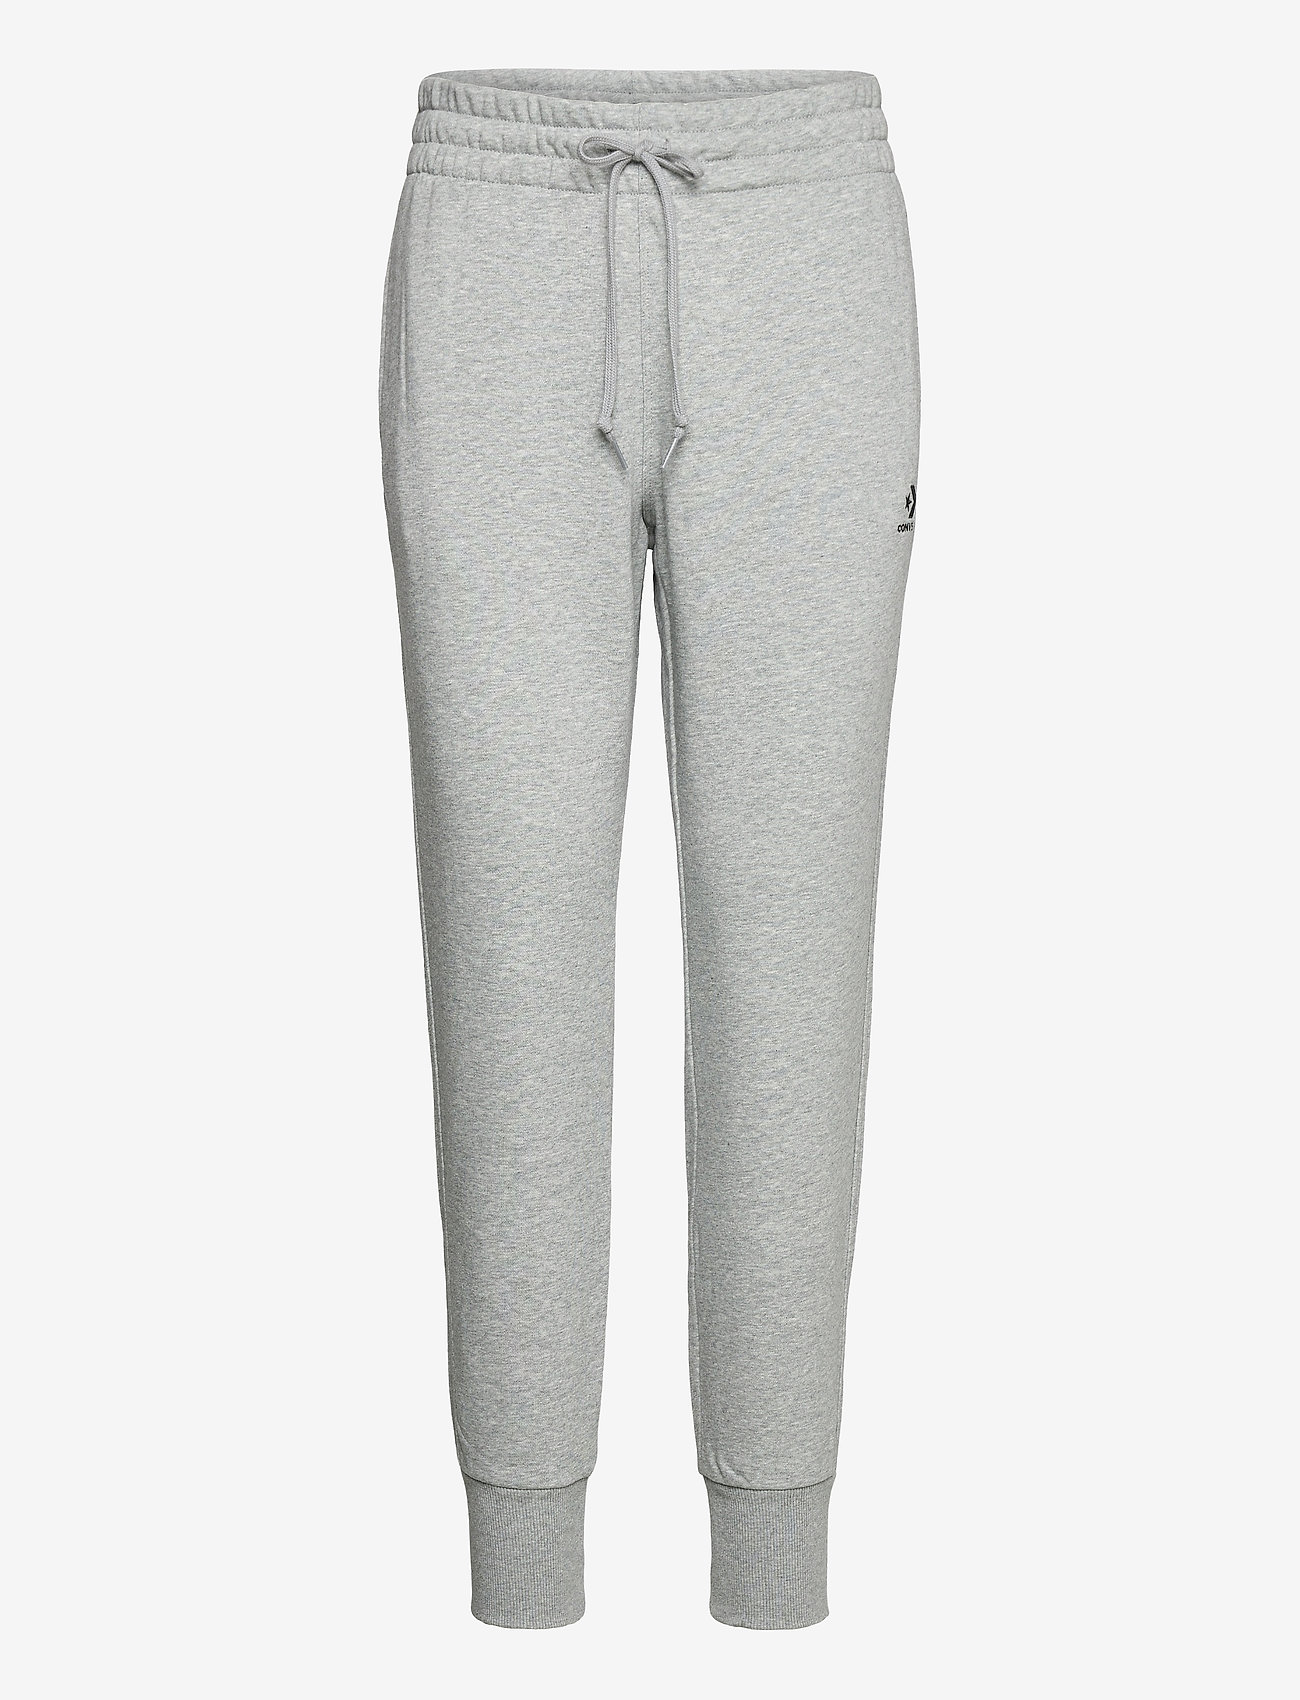 sweatpants with converse